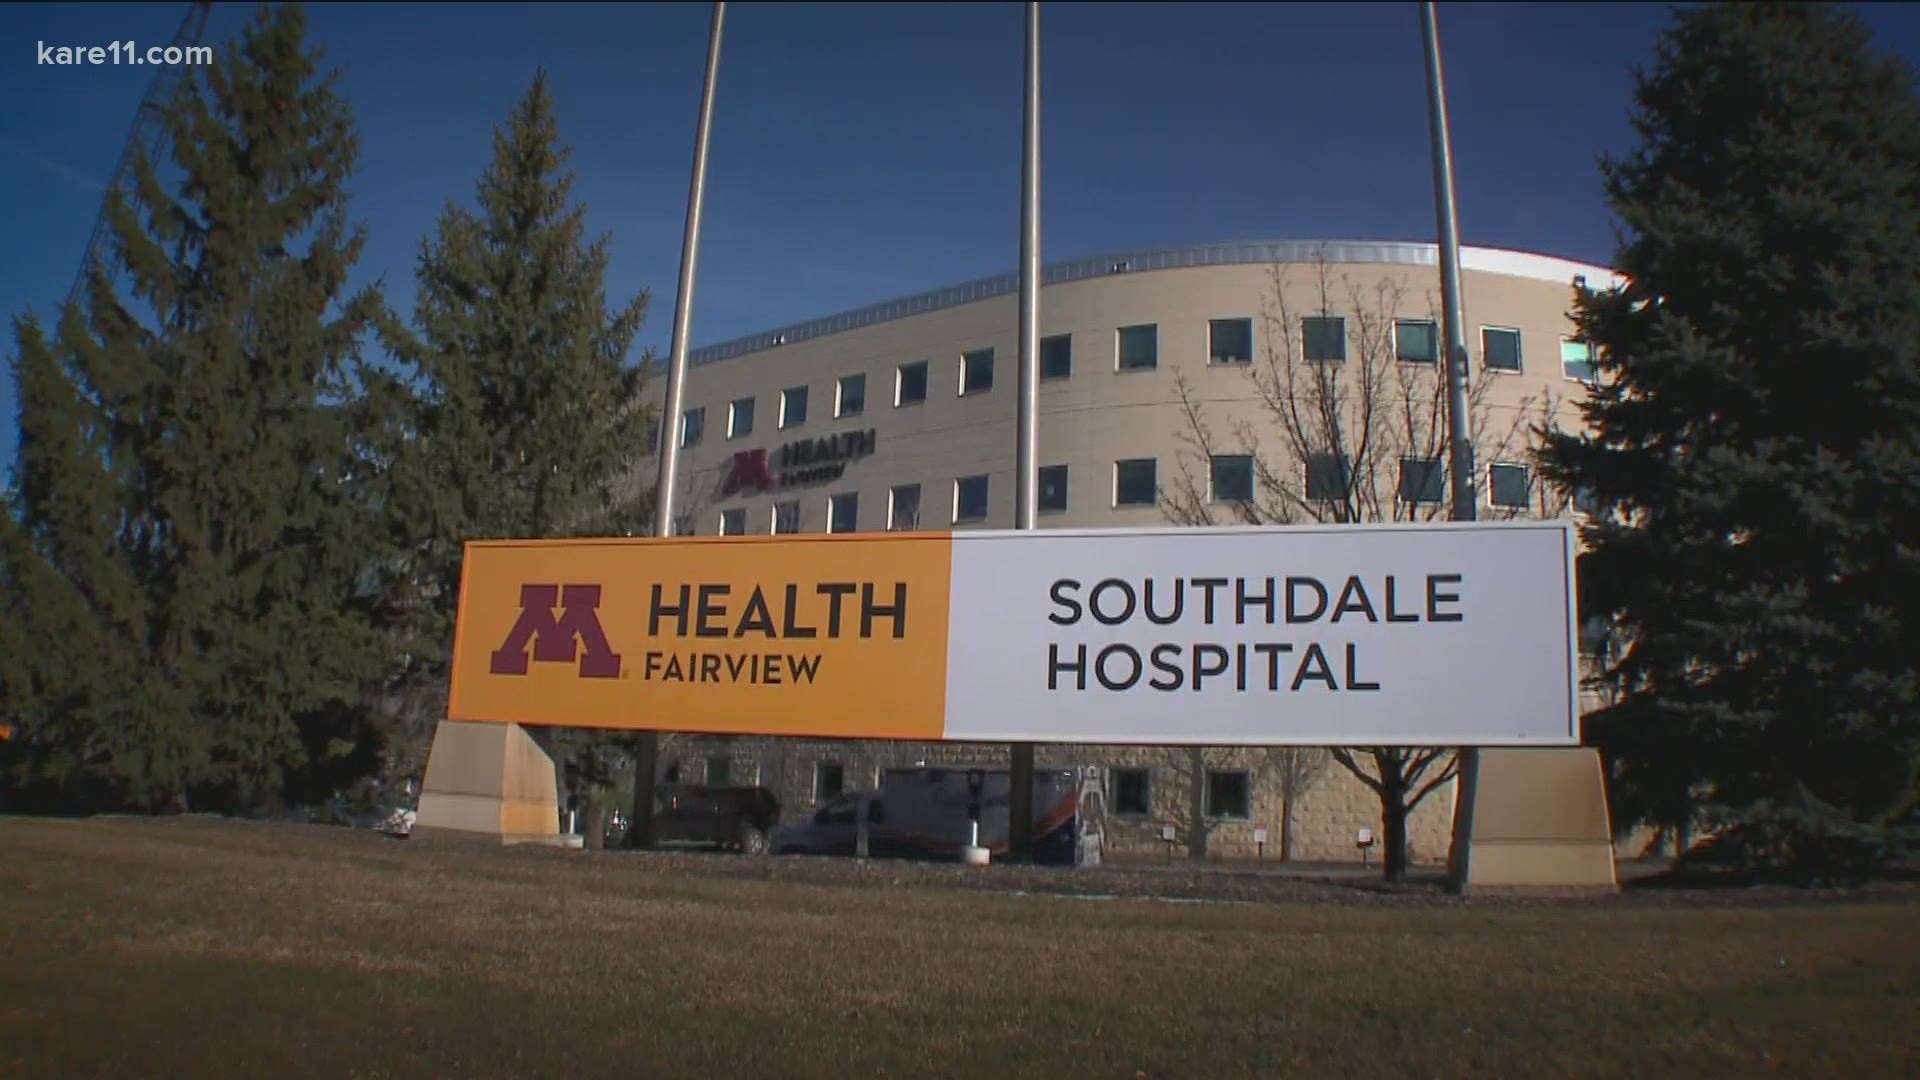 The clinic will take walk-ins for emergency psychiatric assessment and treatment at M Health Fairview's Southdale campus in Edina.